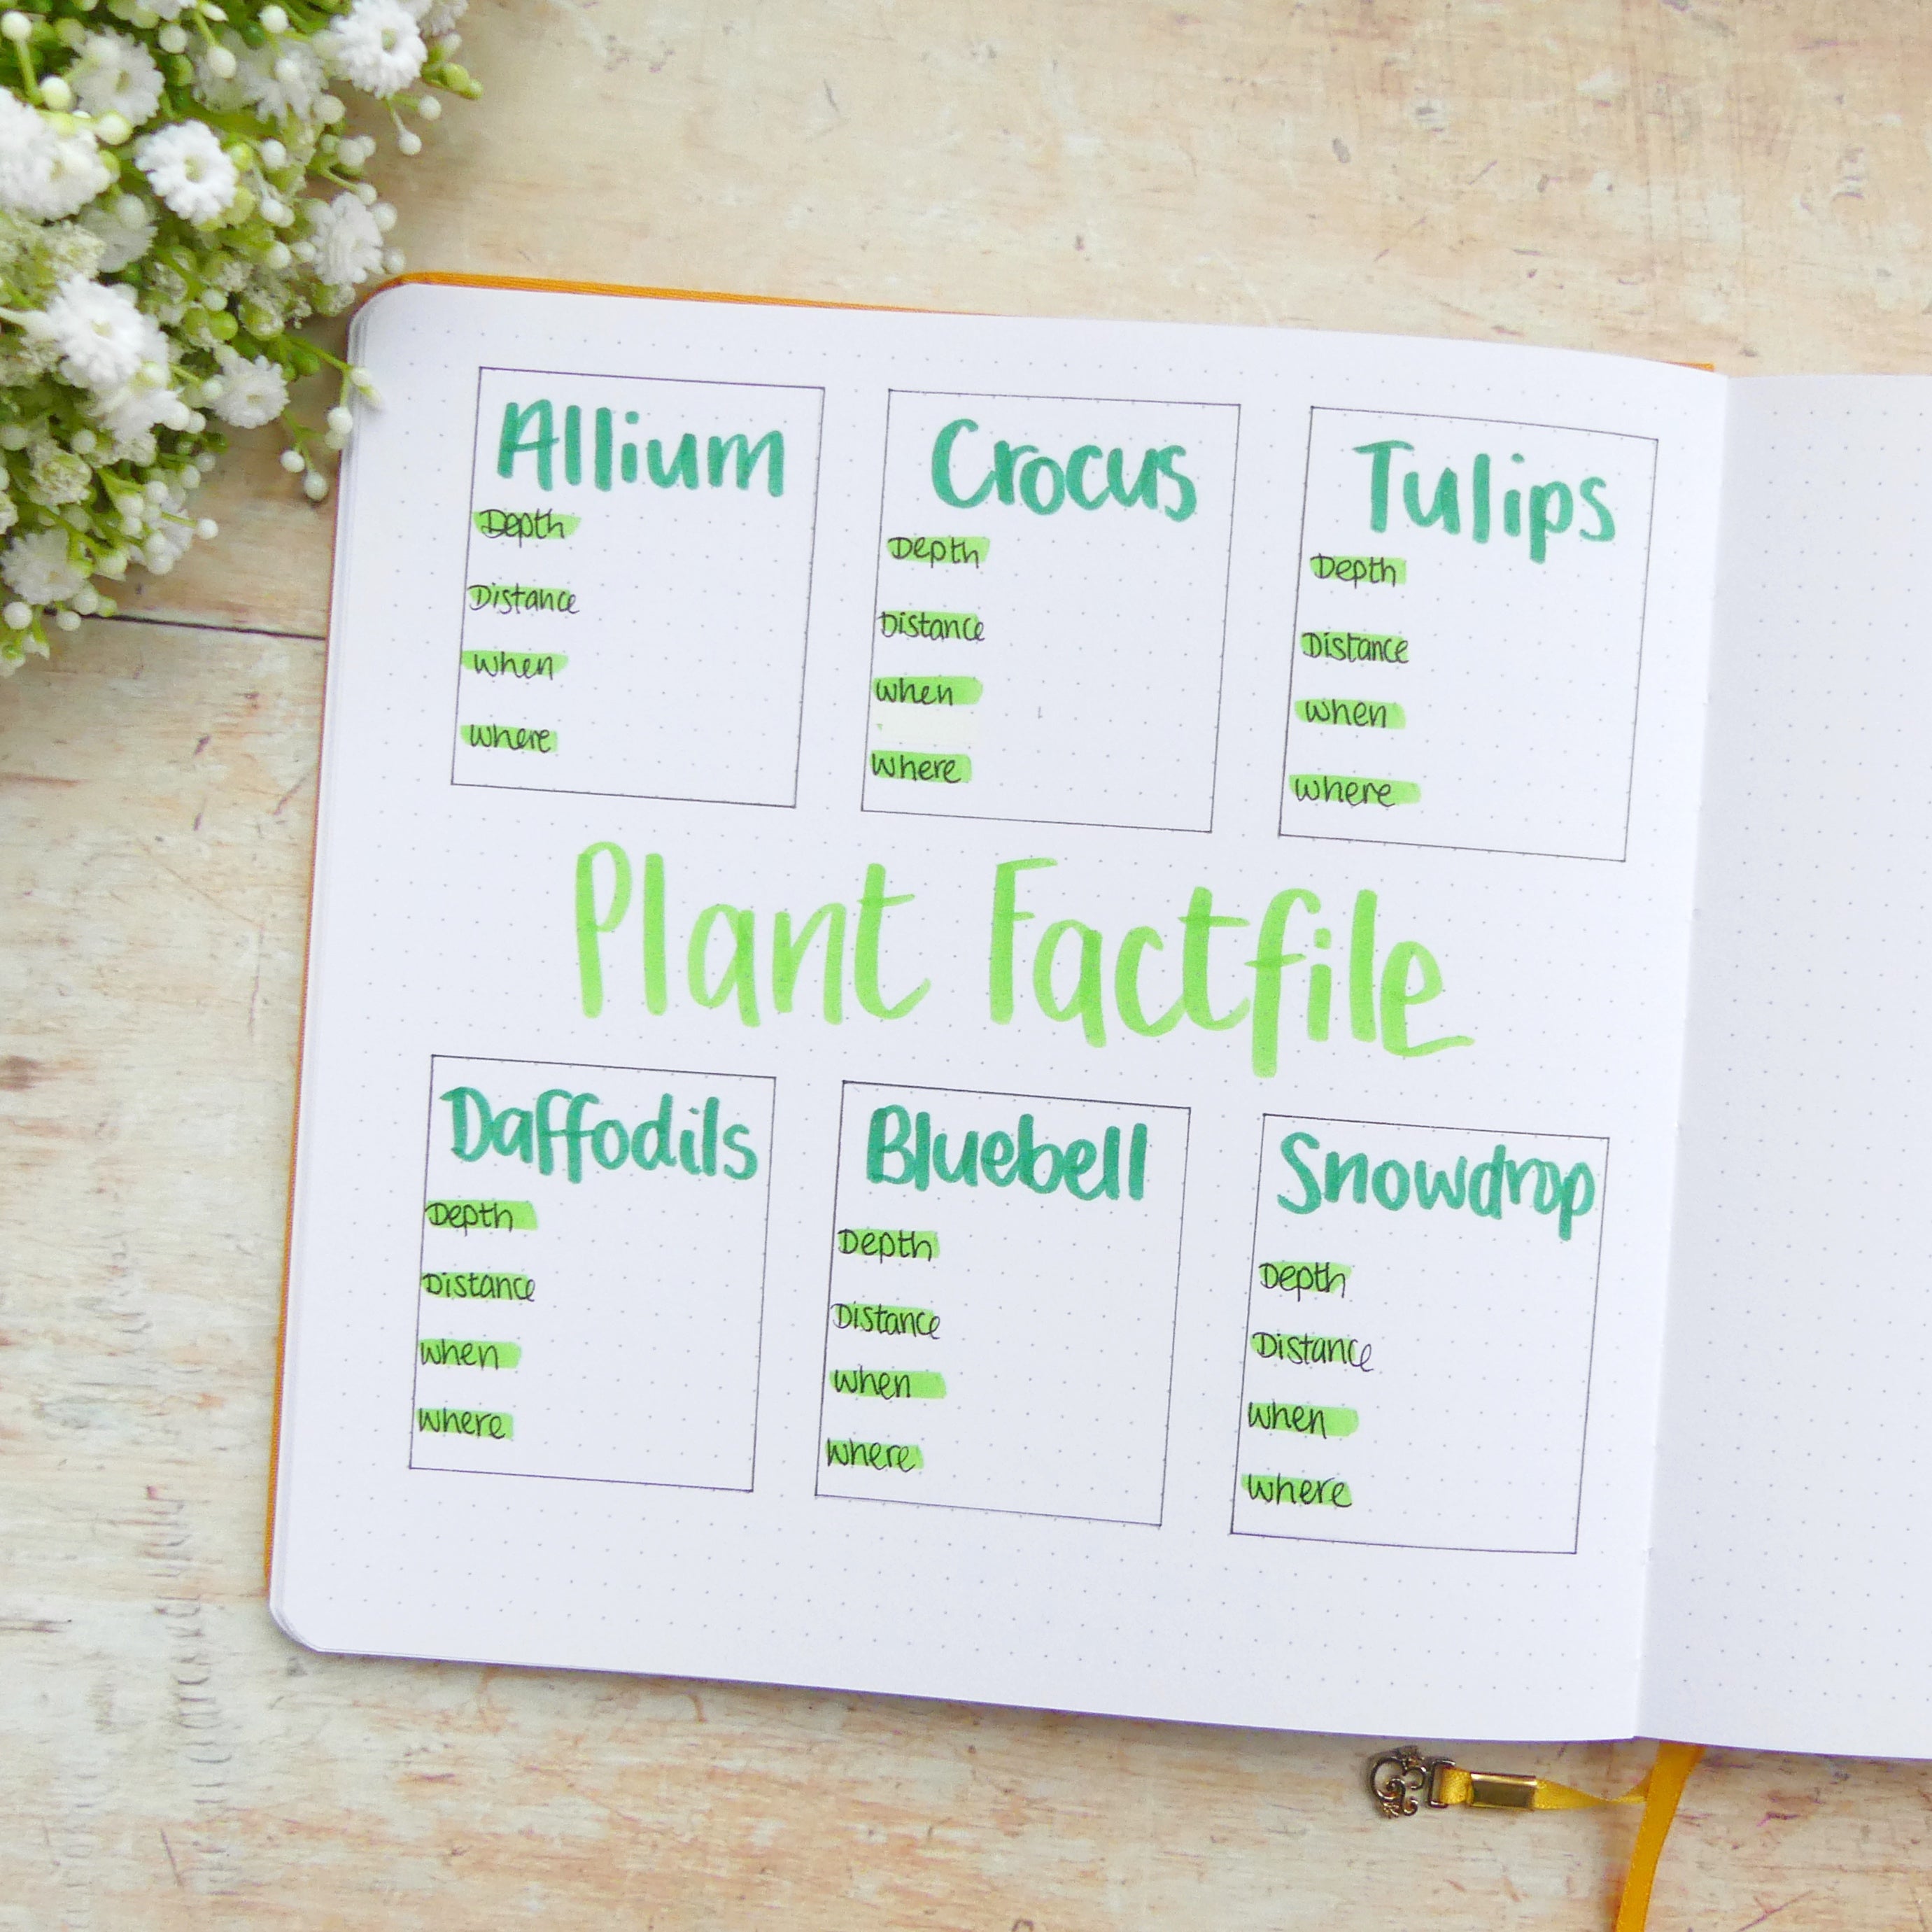 Open page with title Plant fact file and 6 boxes for plant notes